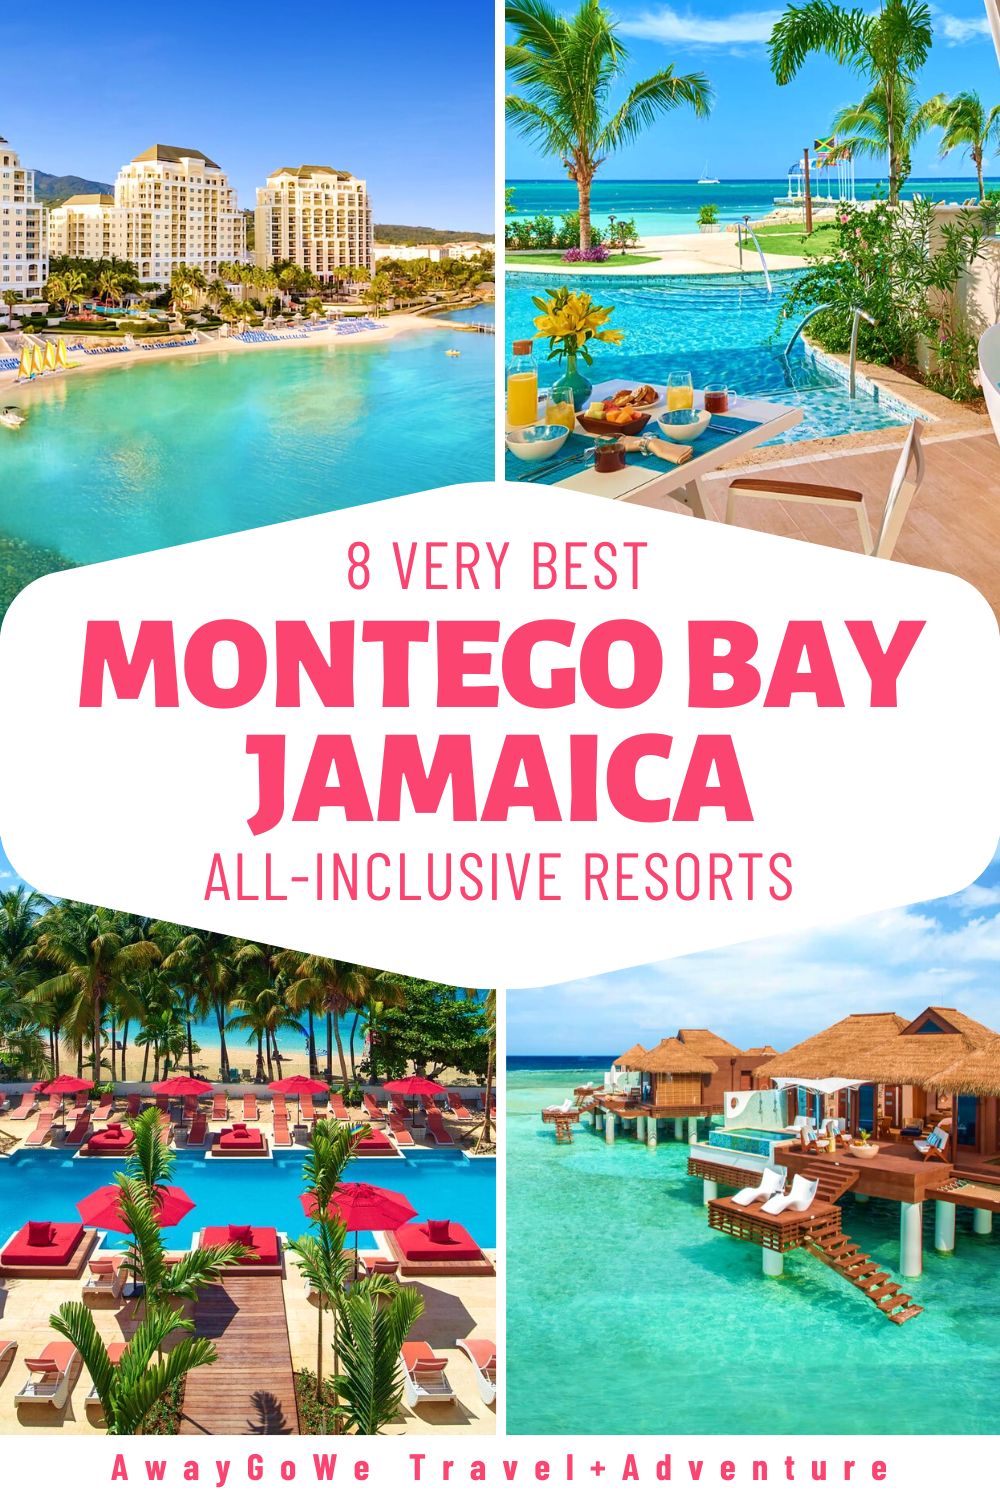 8 Very Best Montego Bay All-Inclusive Resorts (2023)